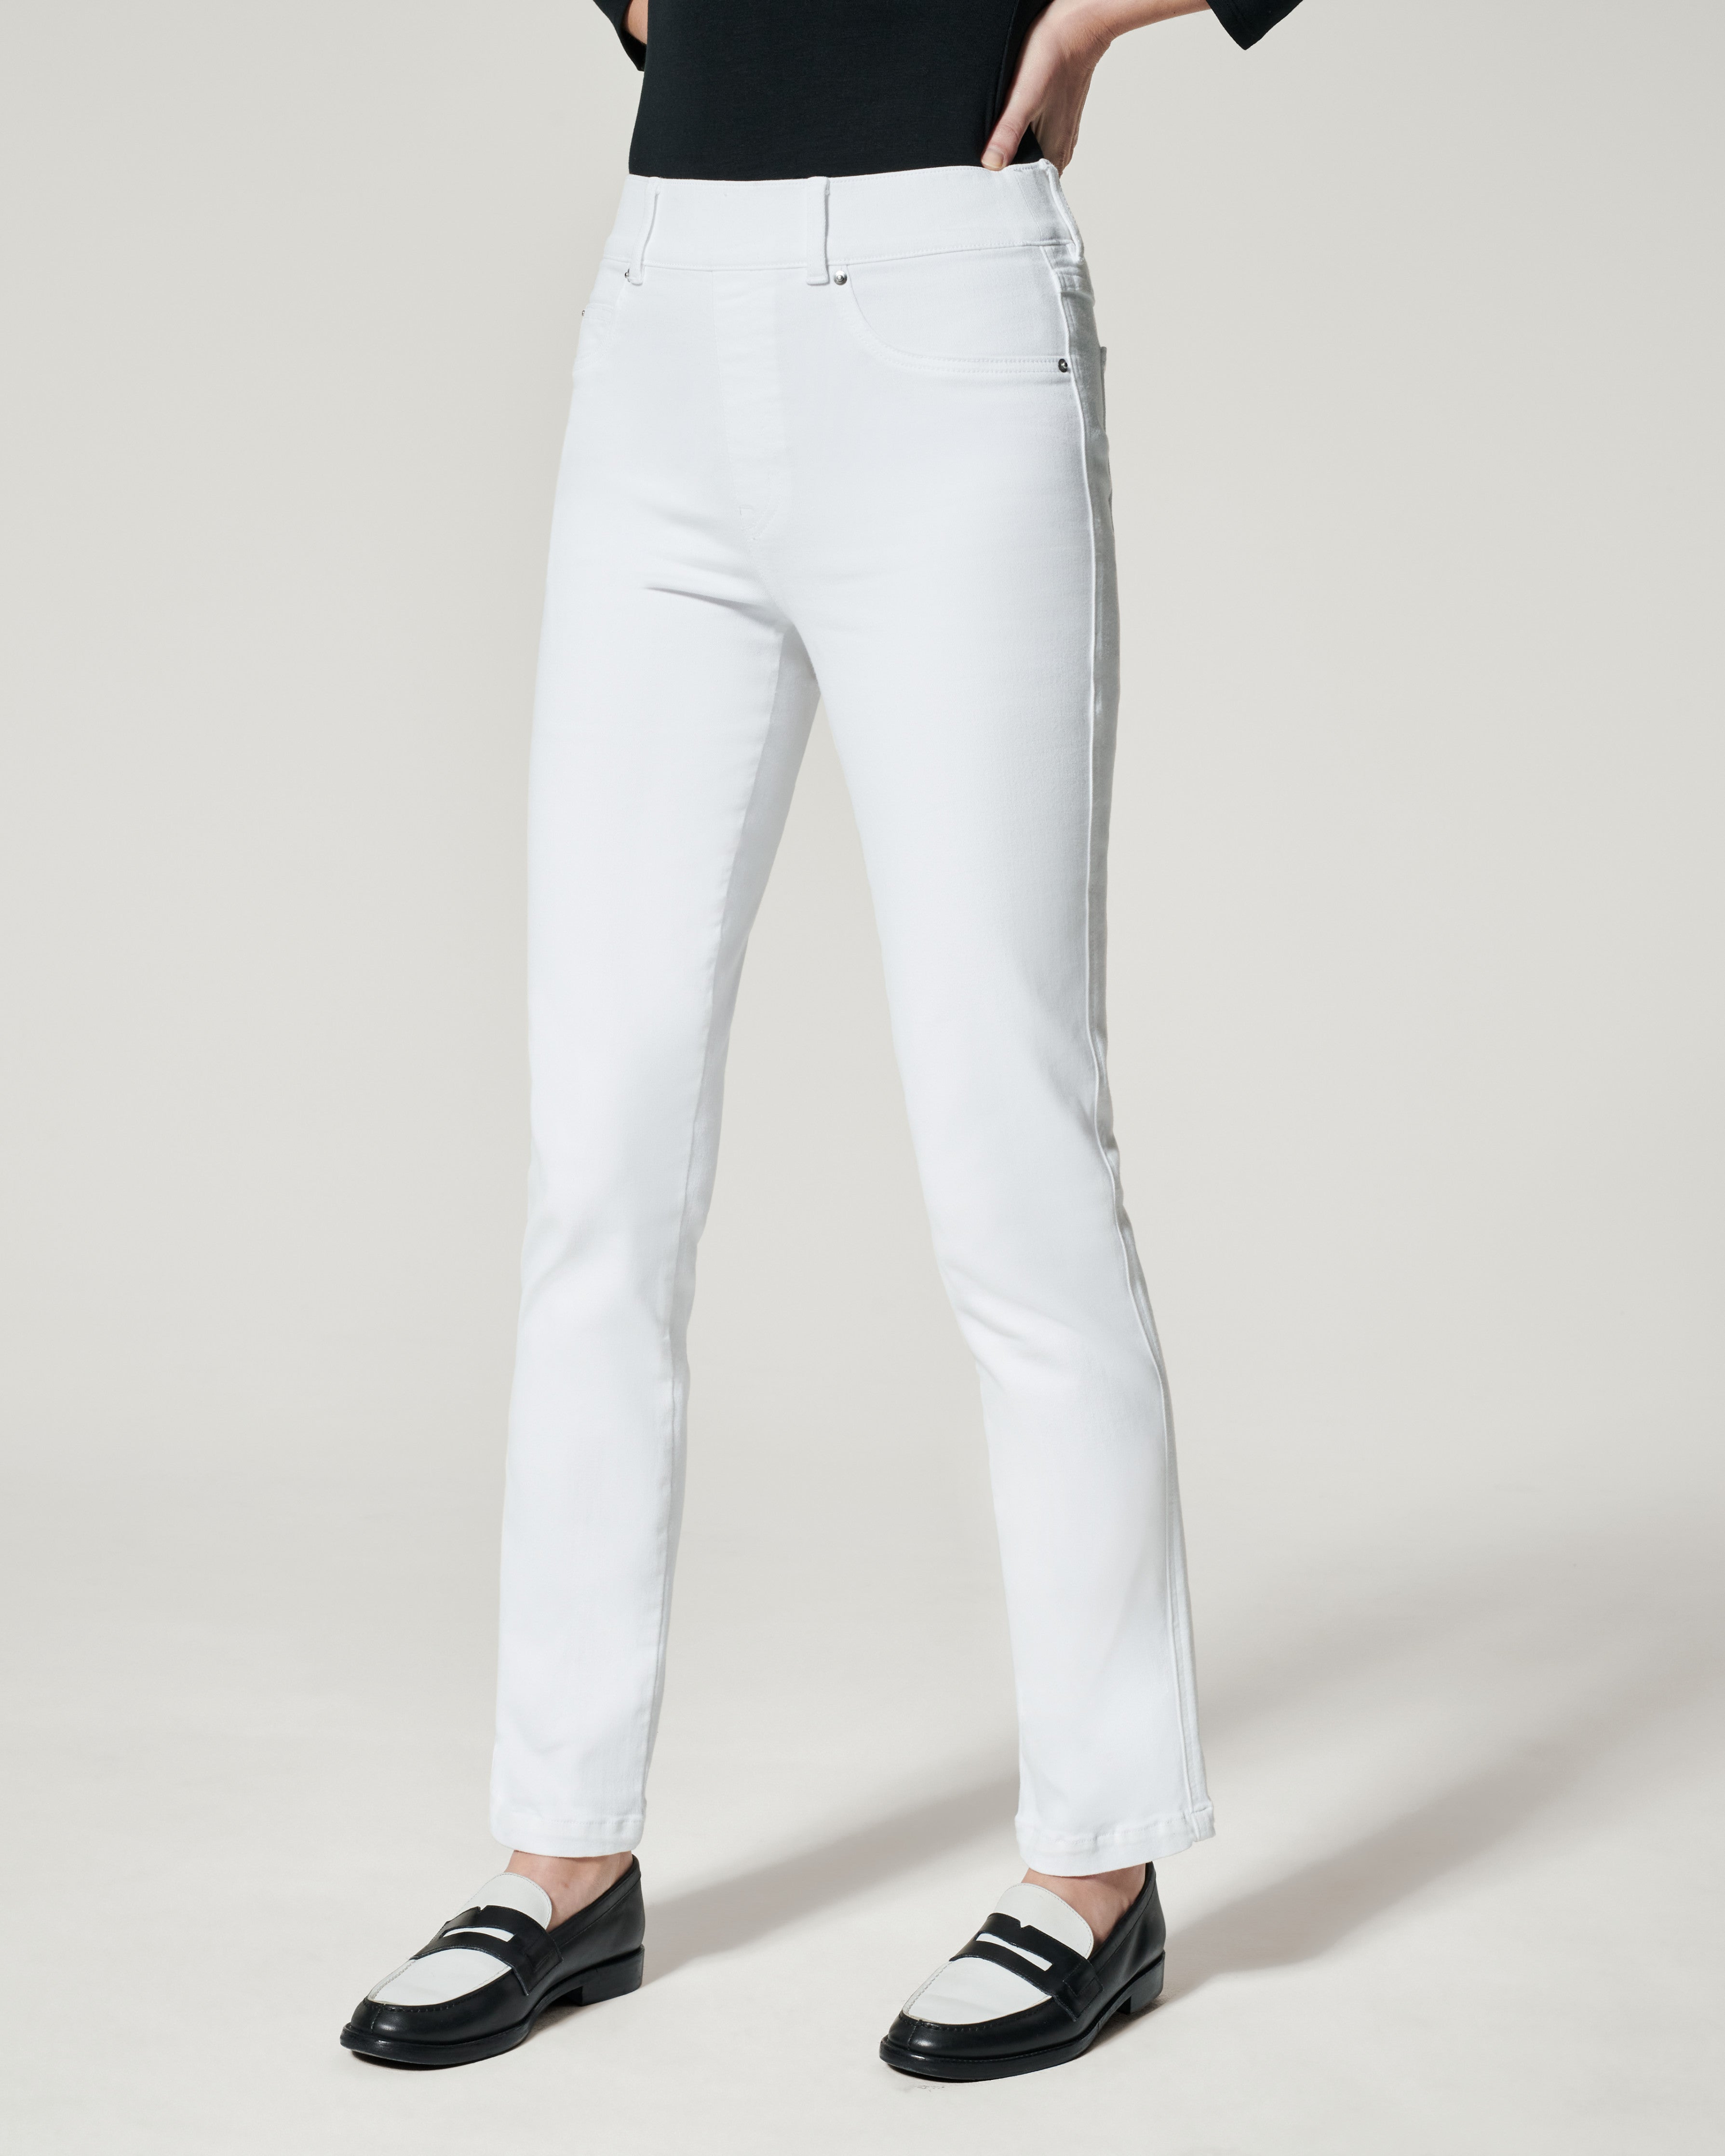 Adorned - Get your best booty ever in our white SPANX Jeans